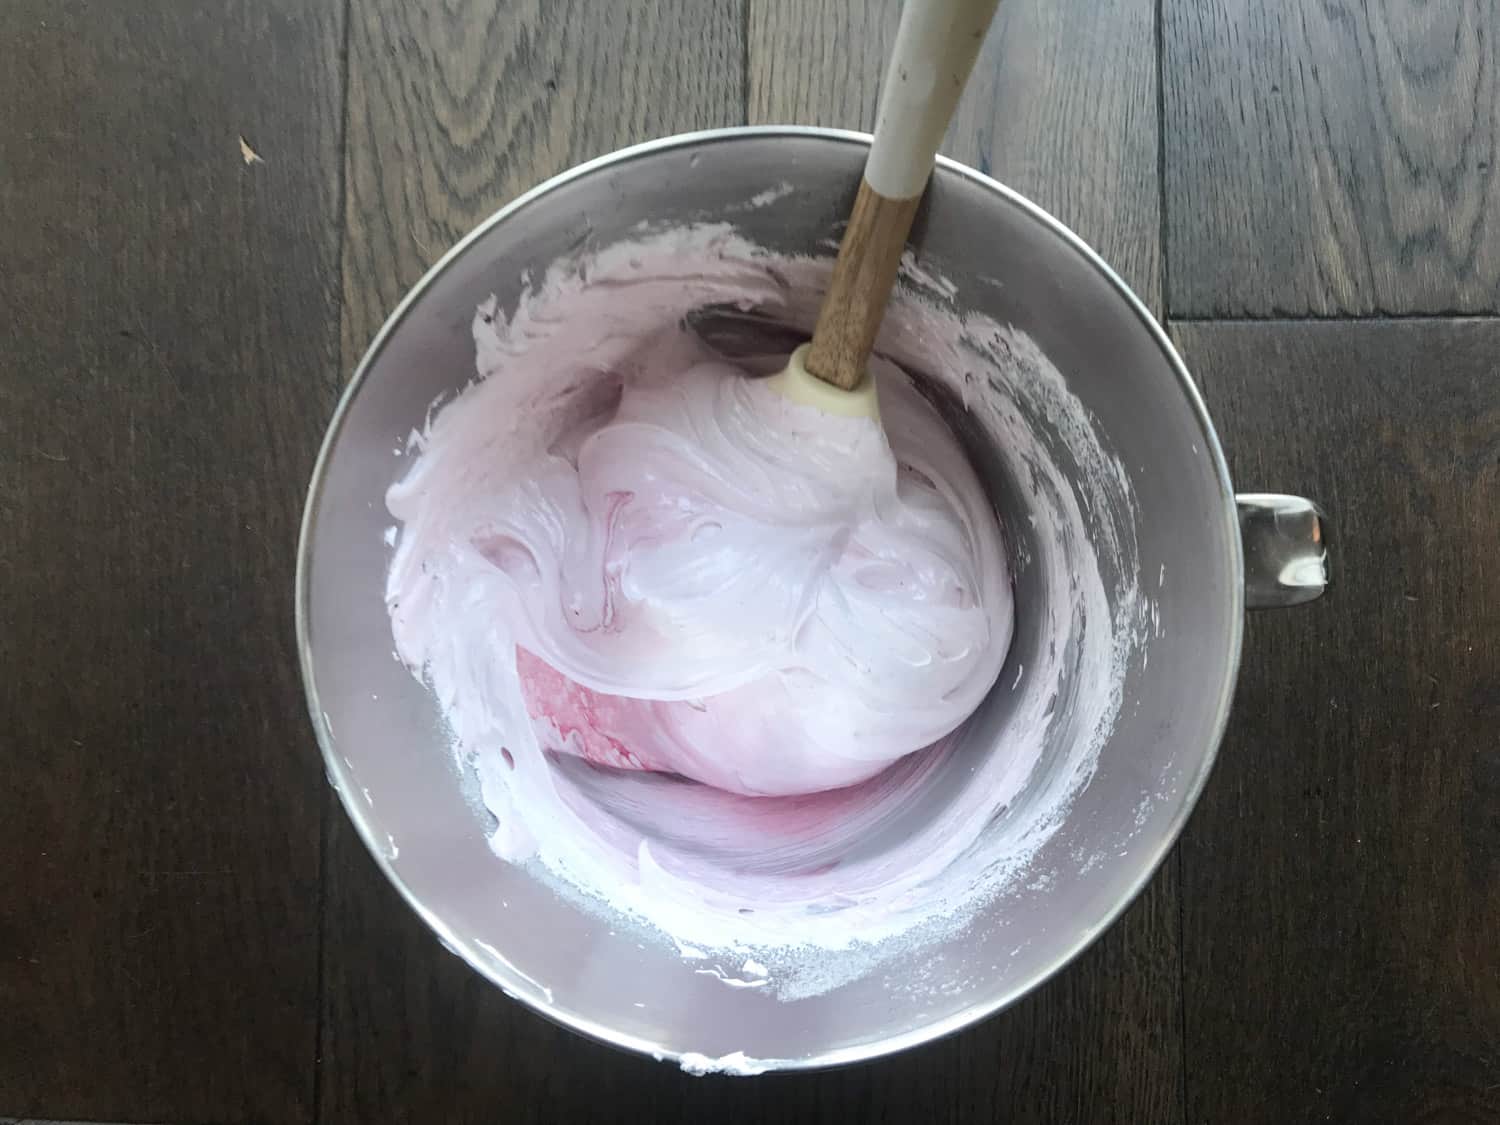 Mixing pink food colouring into meringue